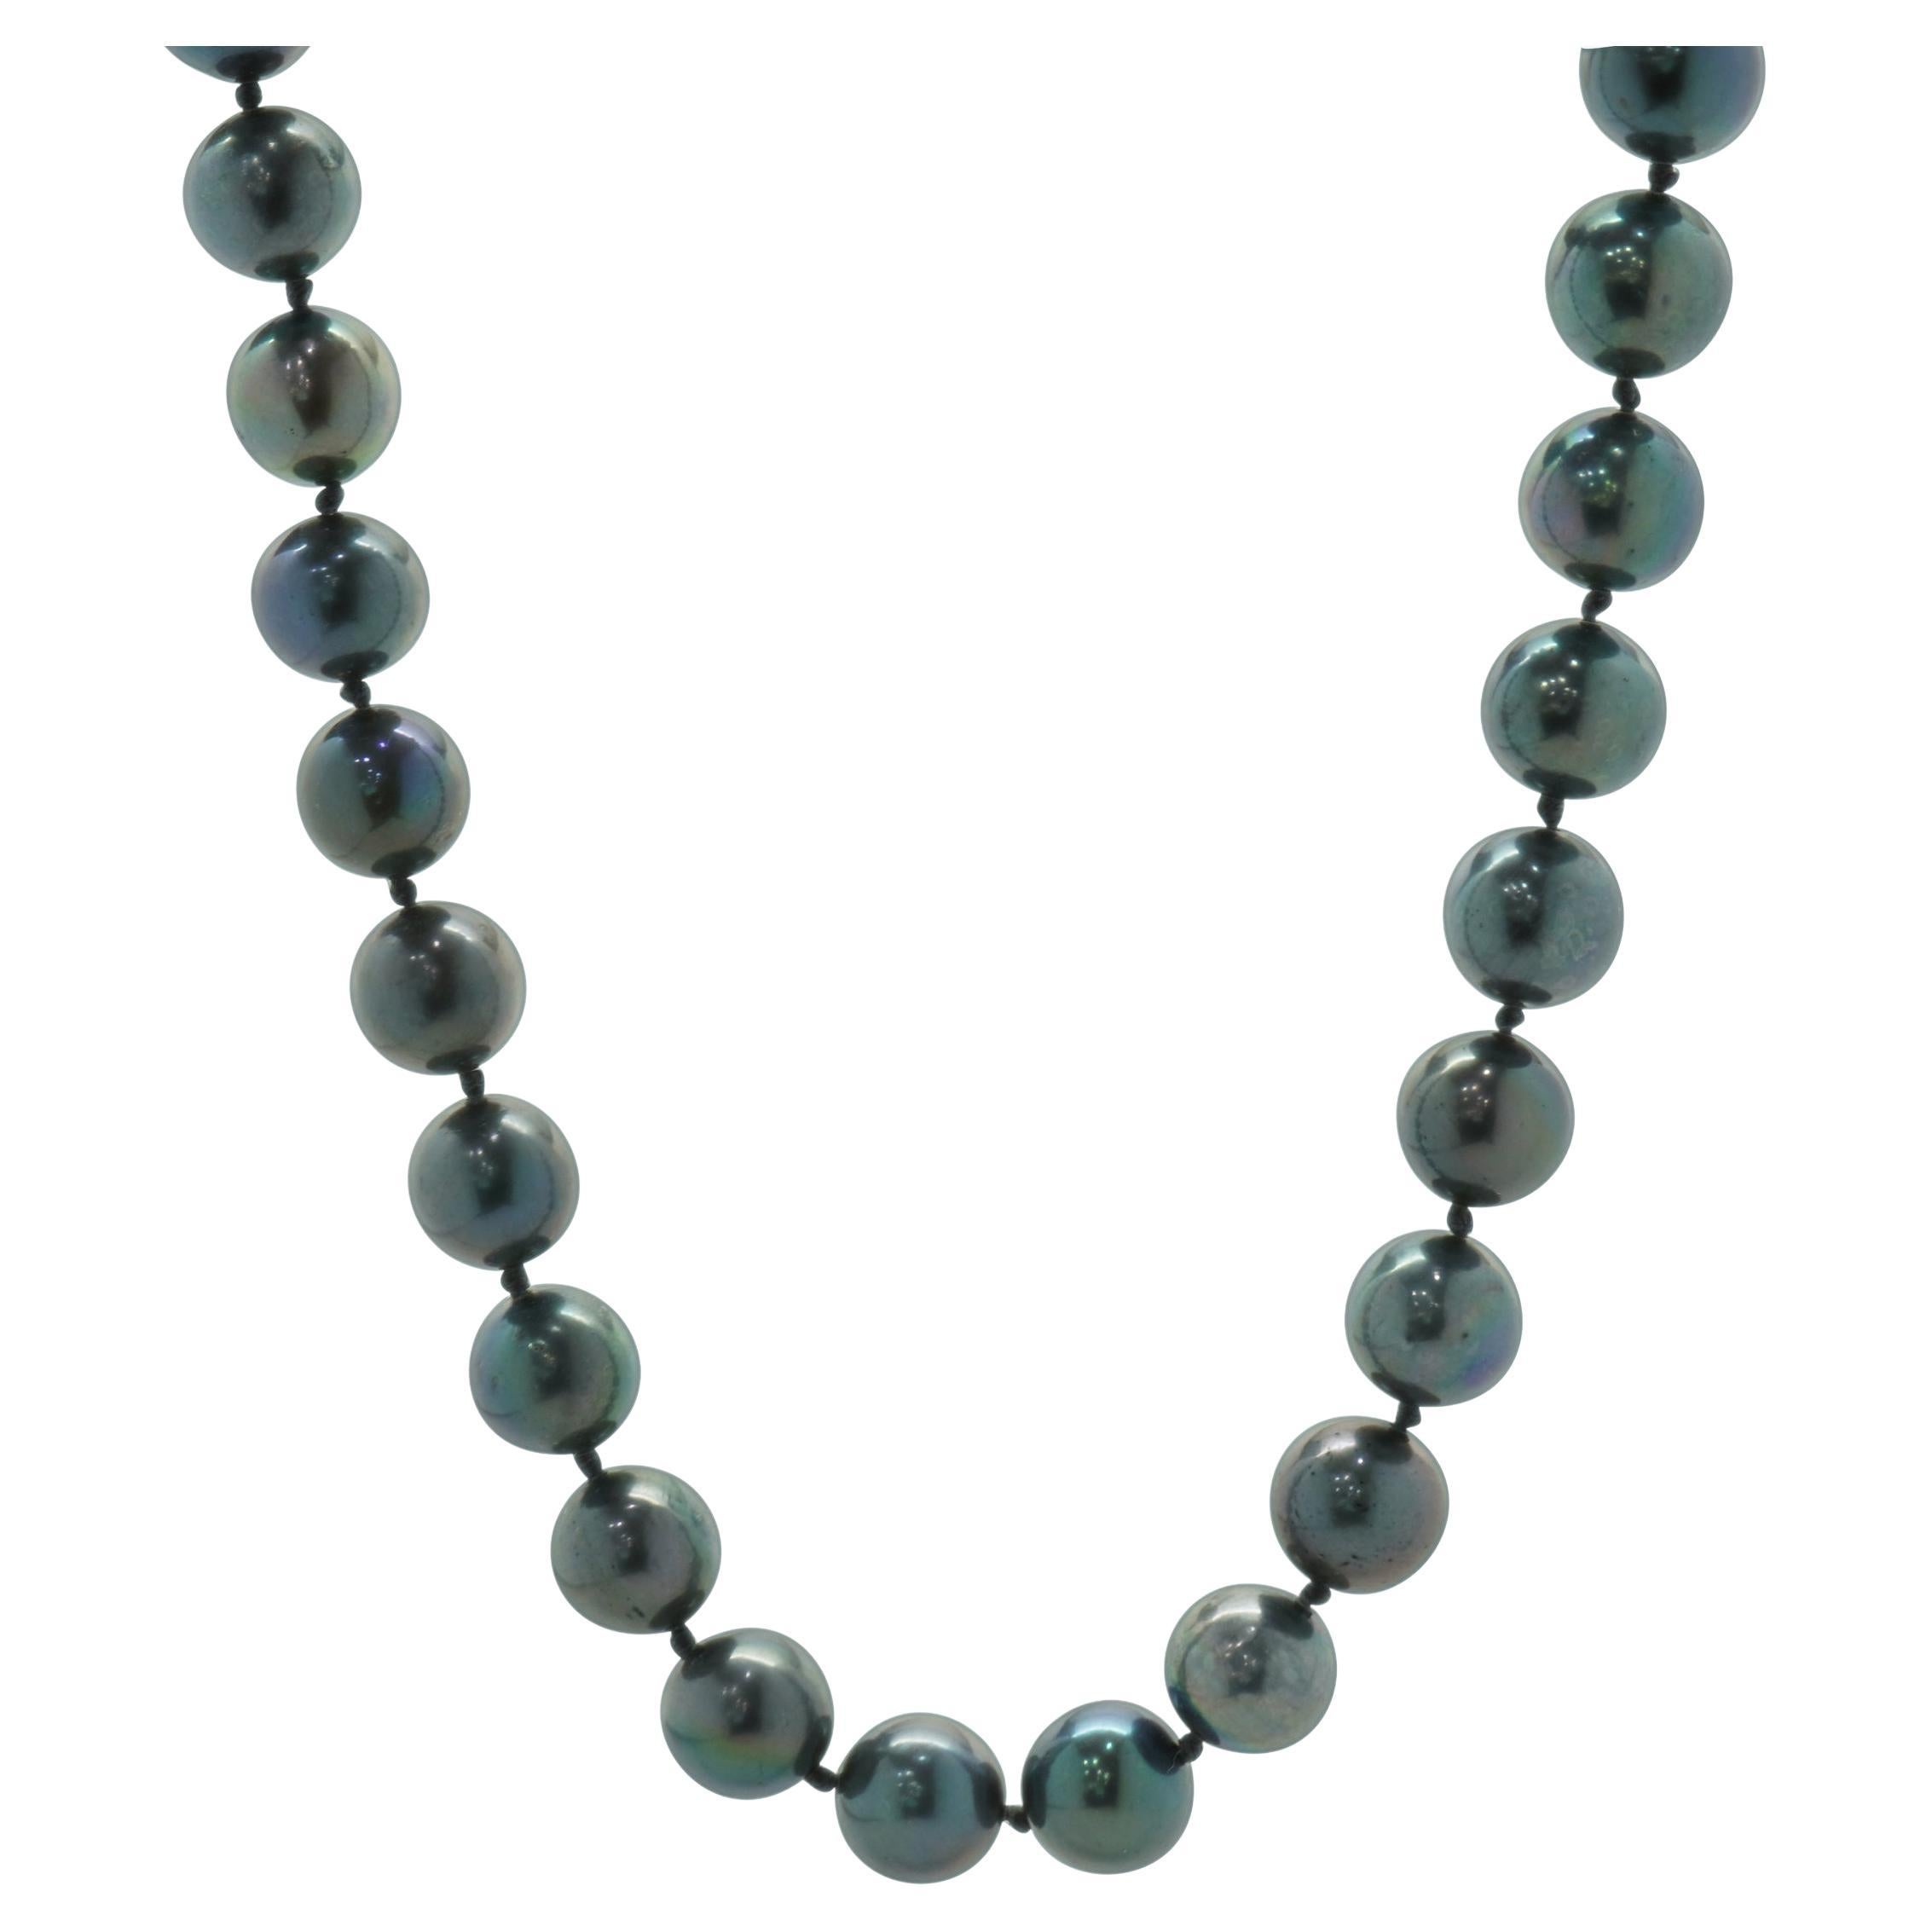 Black Pearl Opera Length Necklace with Sterling Silver Clasp